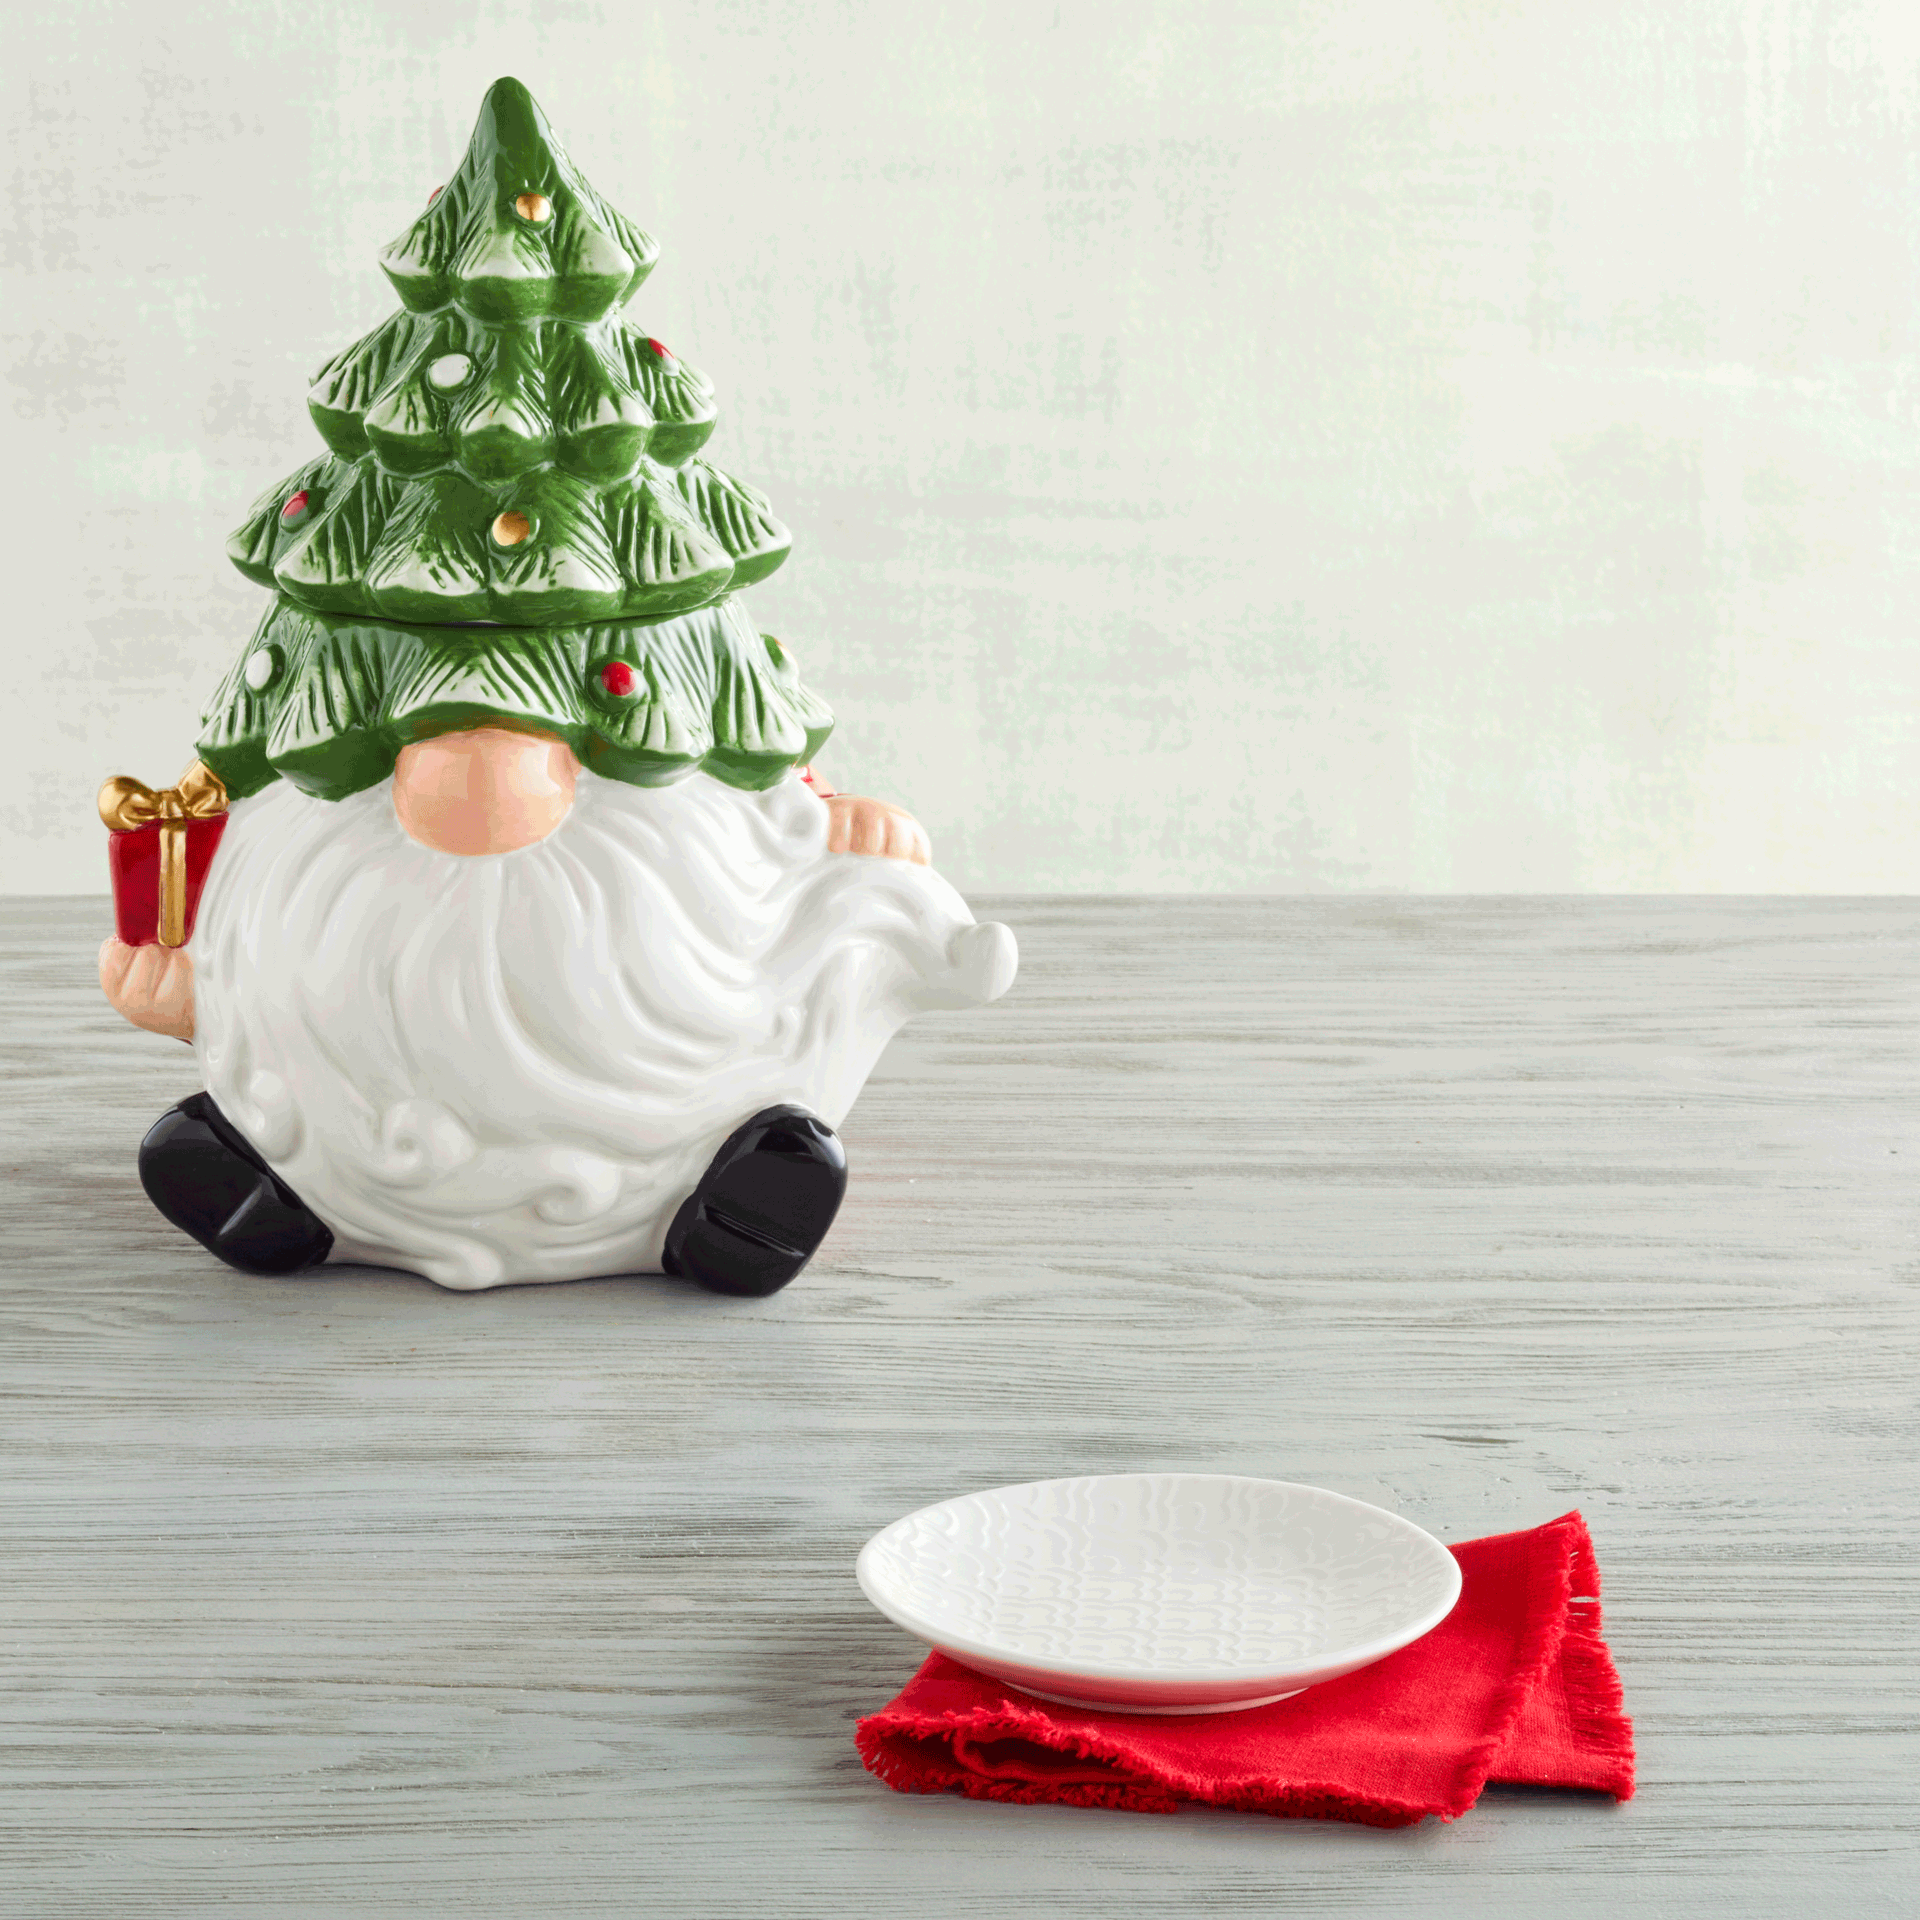 Gnome Cookie Jar with Cookies